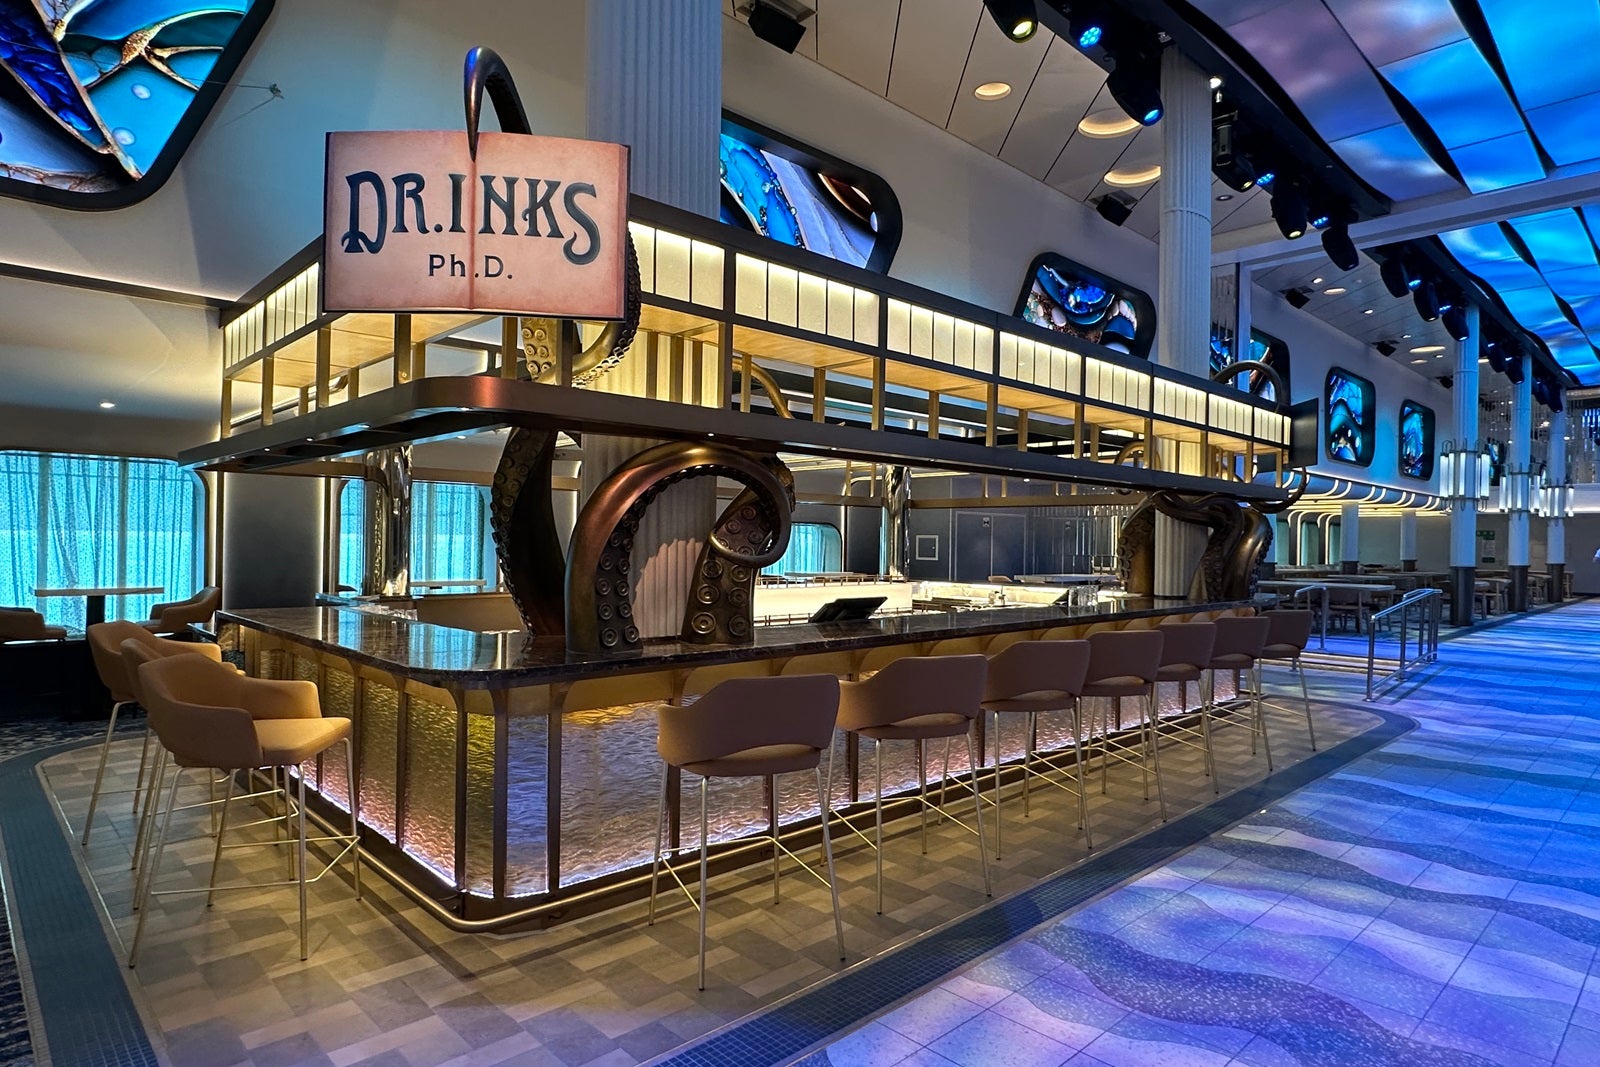 A bar with stools and a sign that reads "Dr. Inks Ph. D."